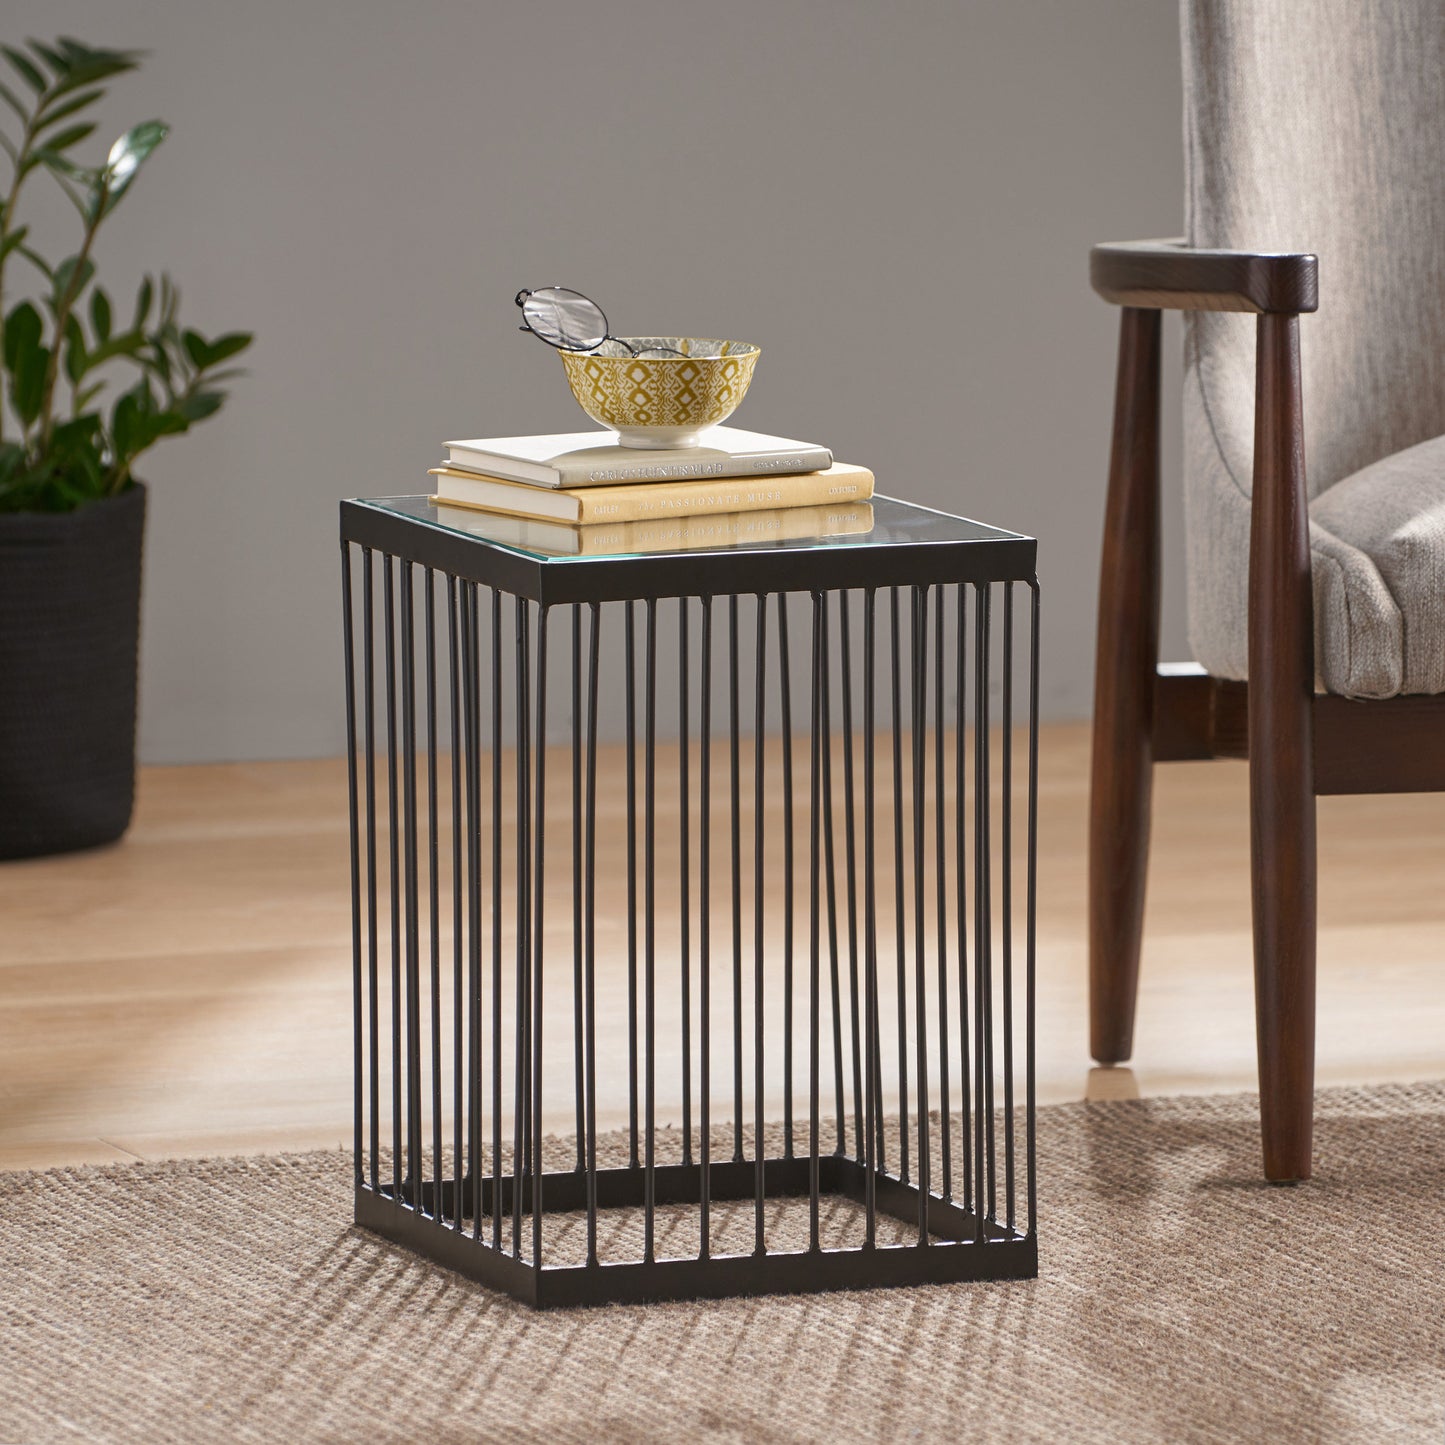 Plevna Contemporary Handcrafted Cage Side Table with Glass Top, Black and Clear